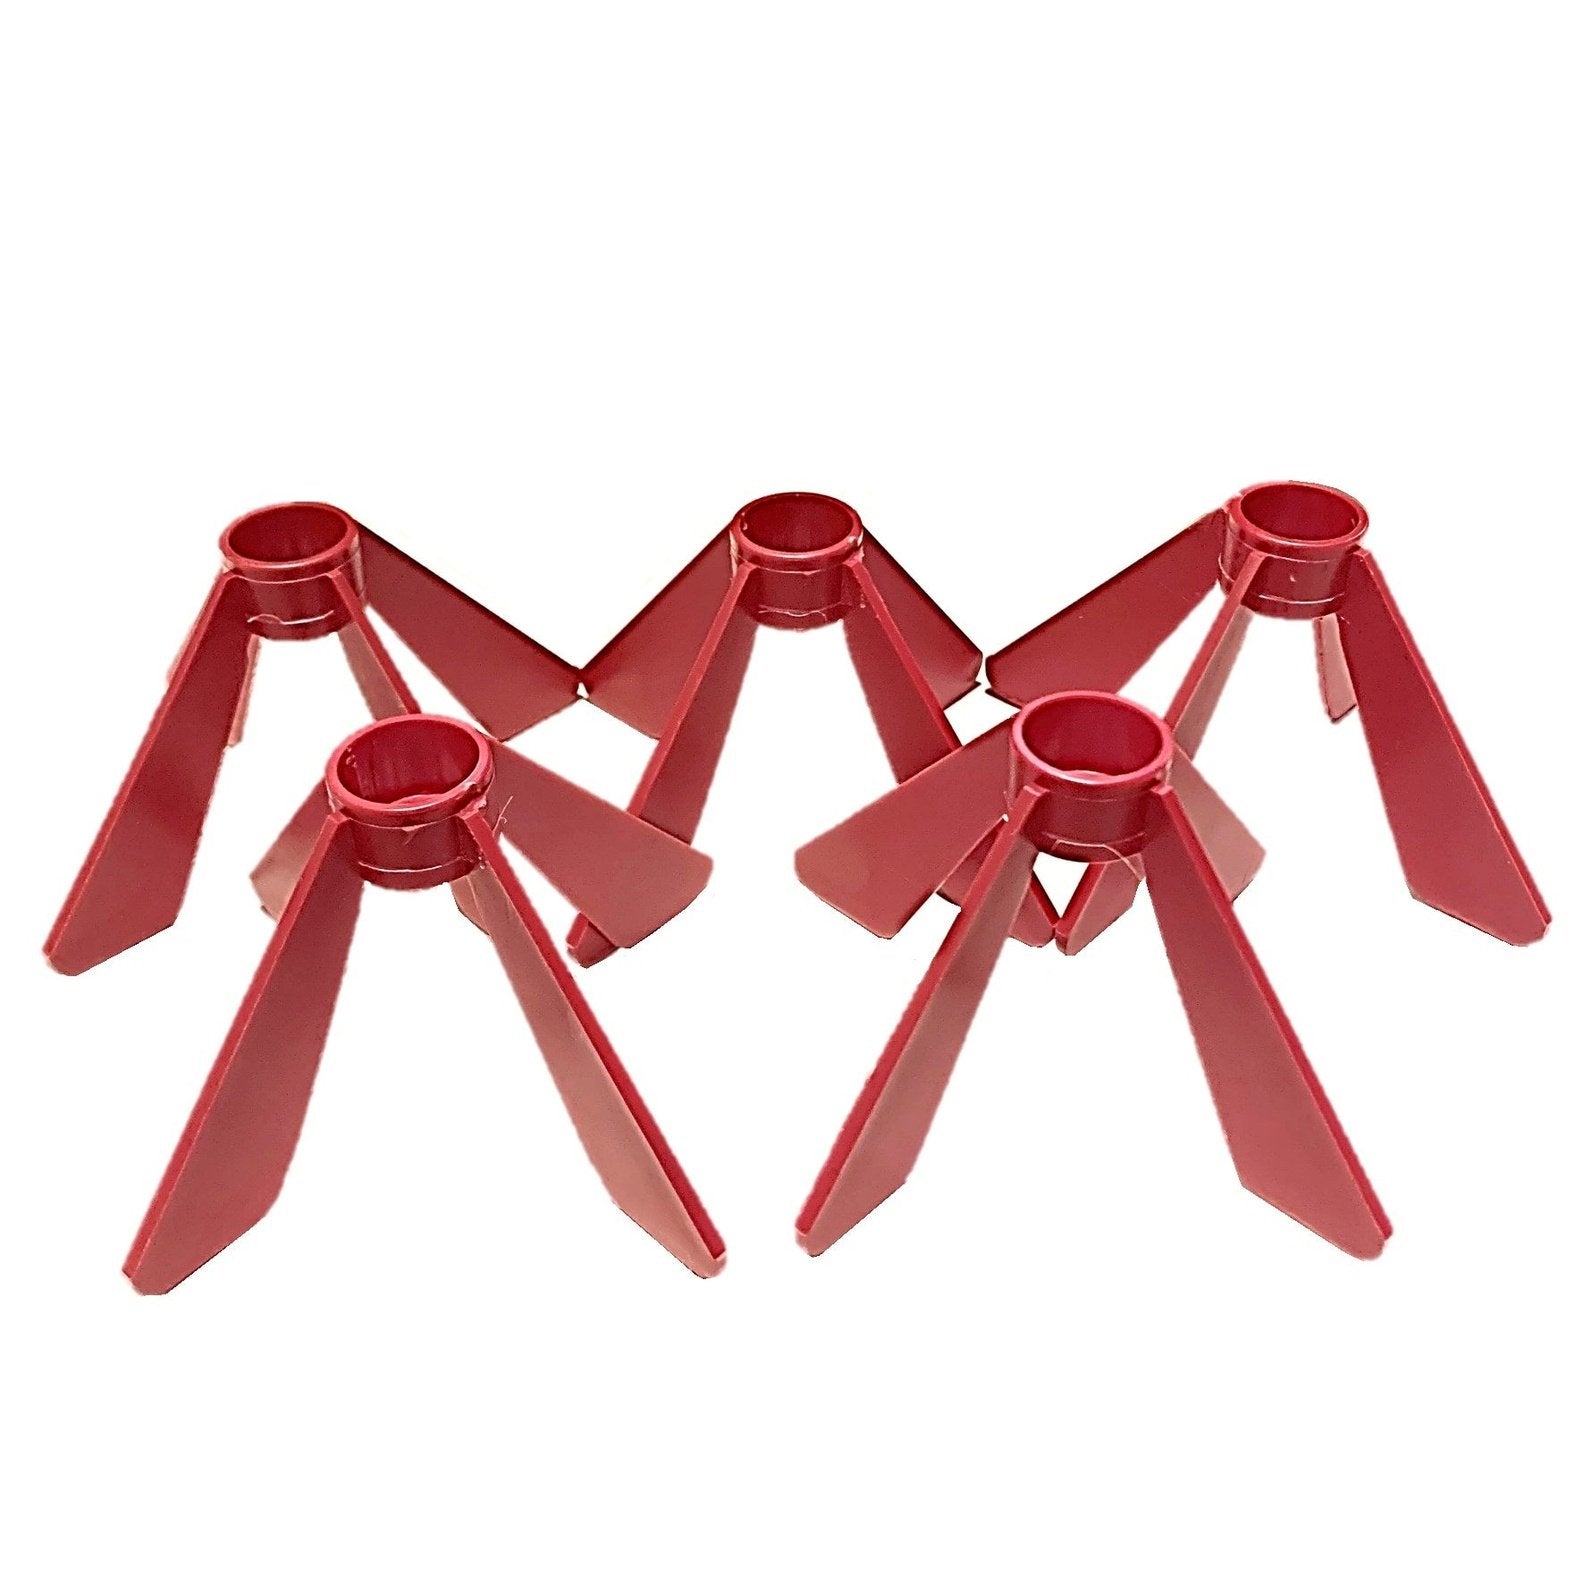 10 Piece Missile Wings - Small Red